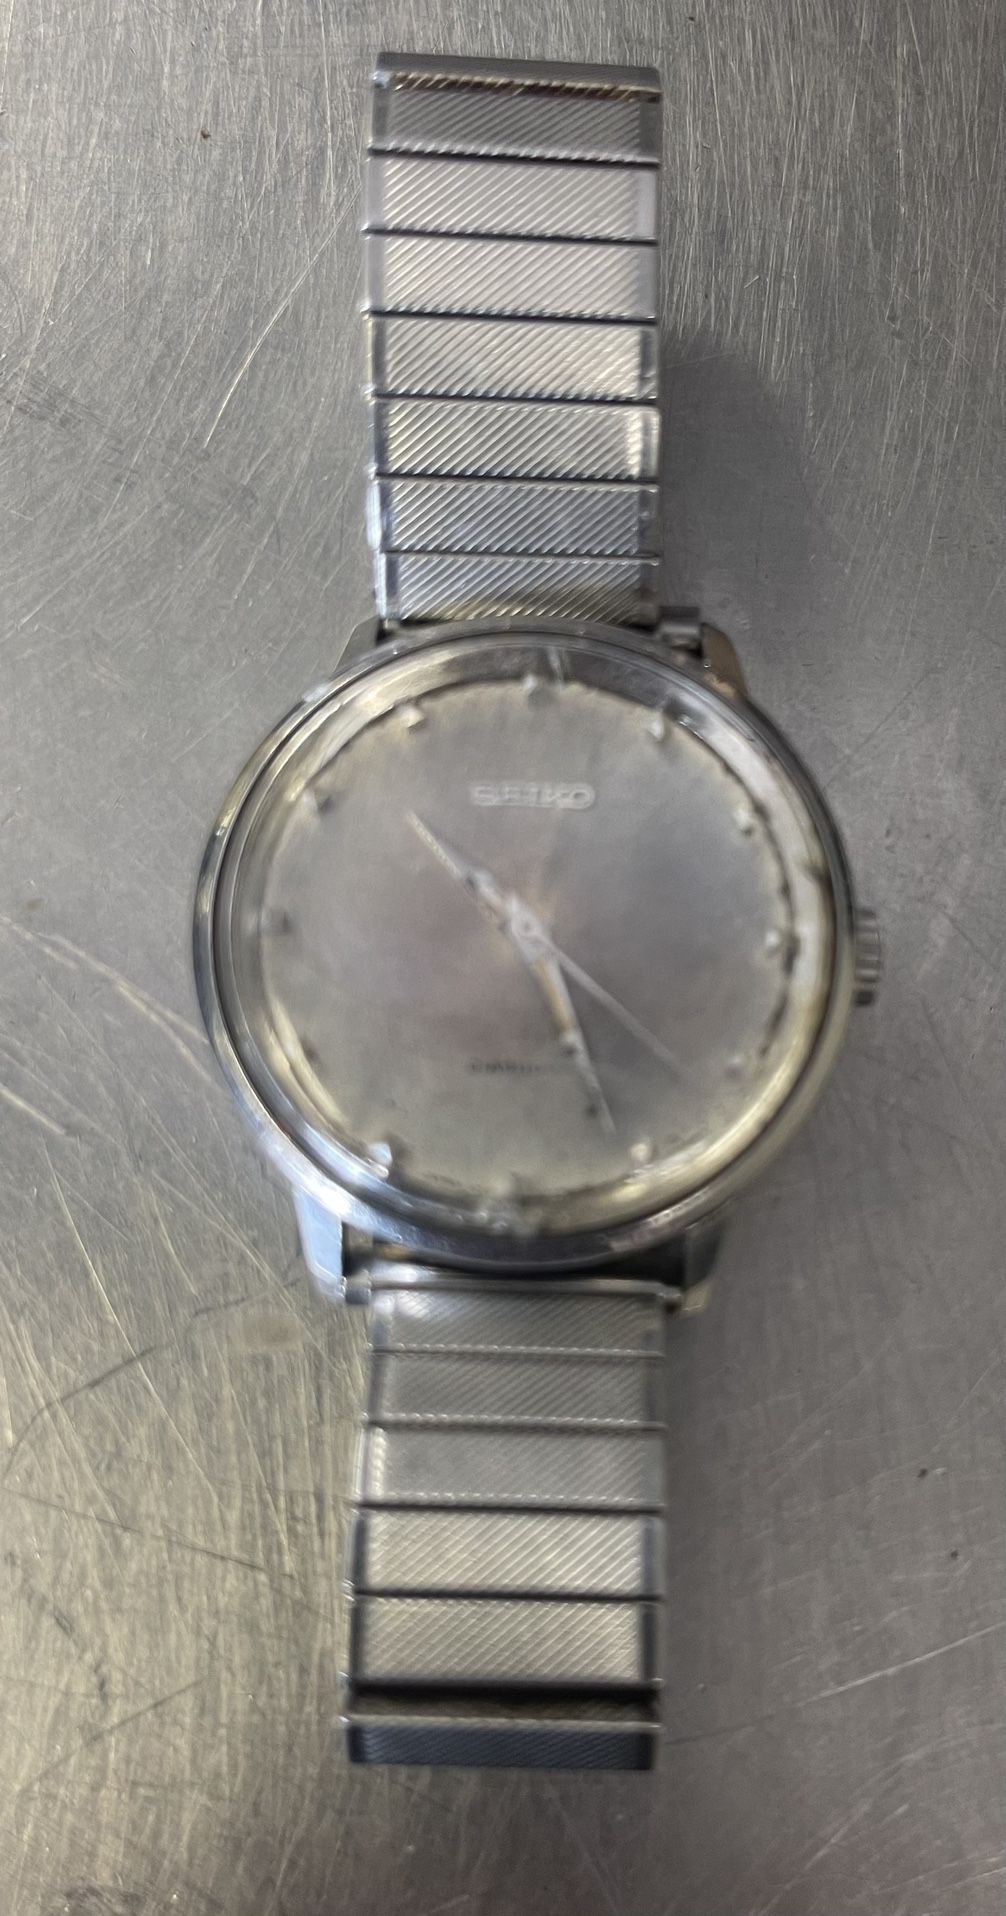 Seiko 6220-8990 Manual Wind Vintage Men's Watch from 1968 for Sale in  Jacksonville, FL - OfferUp